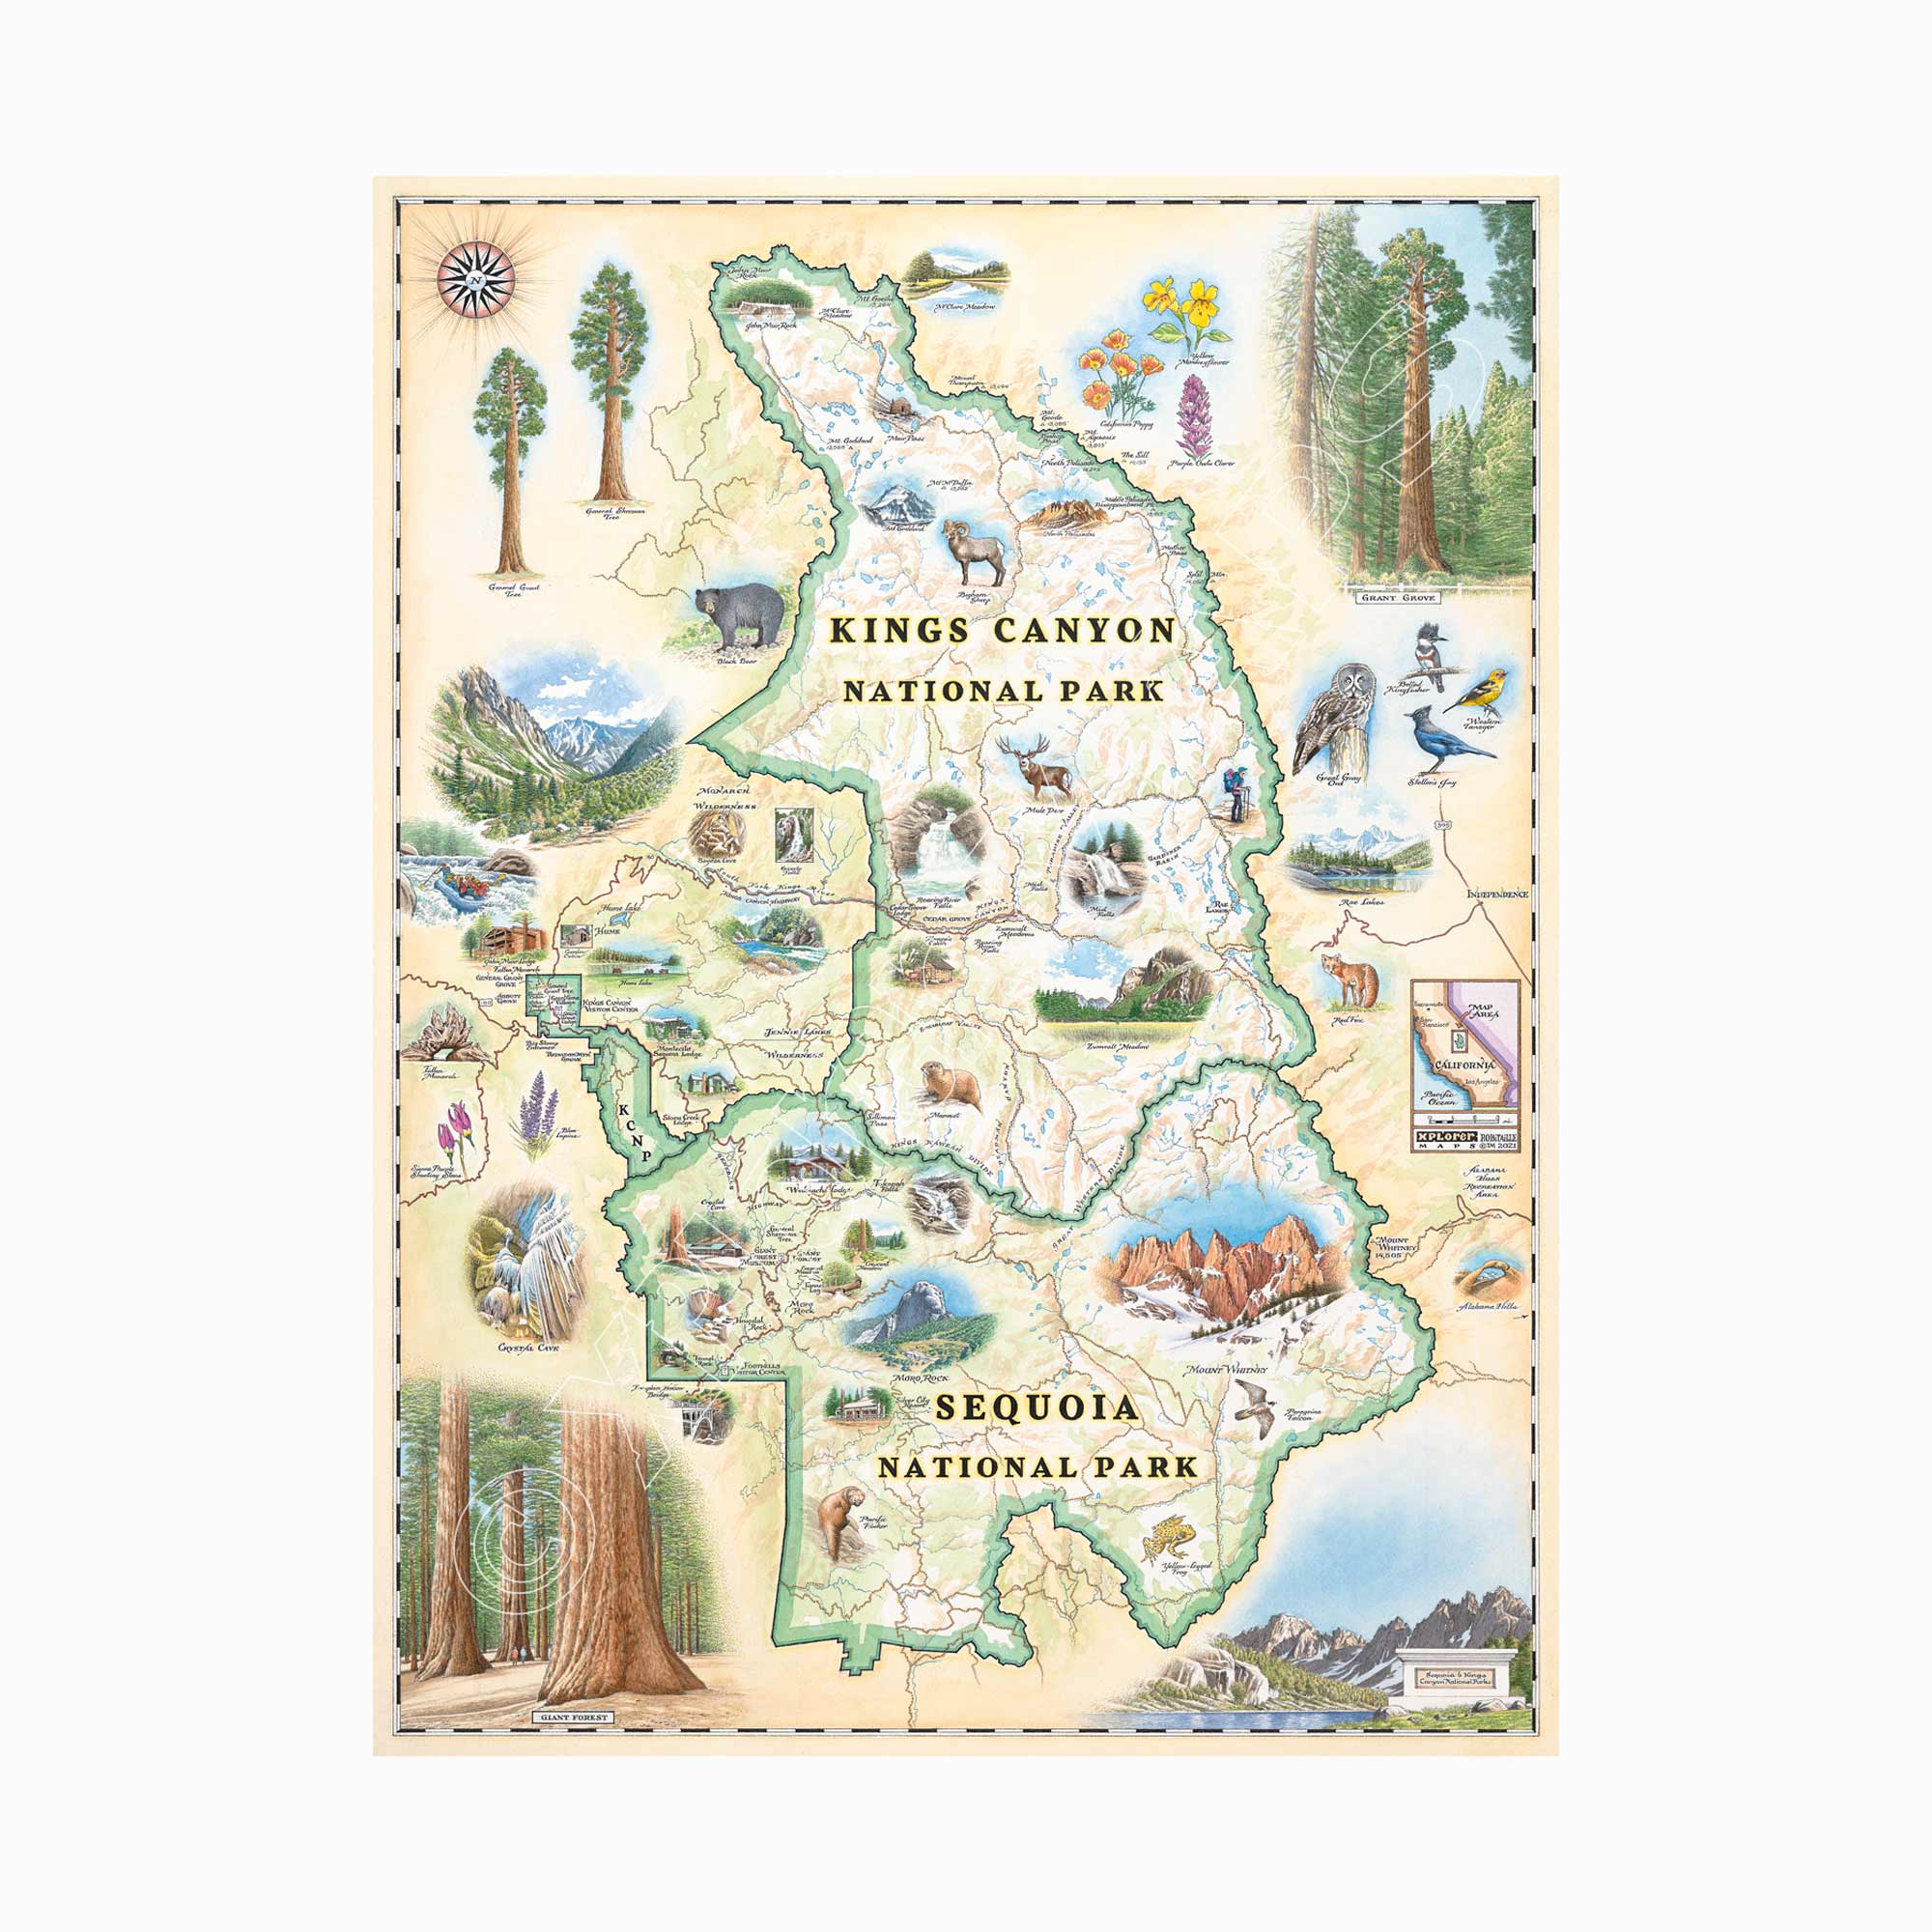 Sequoia & Kings Canyon National Parks hand-drawn map in earth tones beige and green. The map features illustrations of the Giant Forest, Mount Whitney, and the John Muir Lodge. Flora and fauna include, mule deer, red fox, Sierra Purple shooting star flowers, and California poppy. Map measures 18x24.